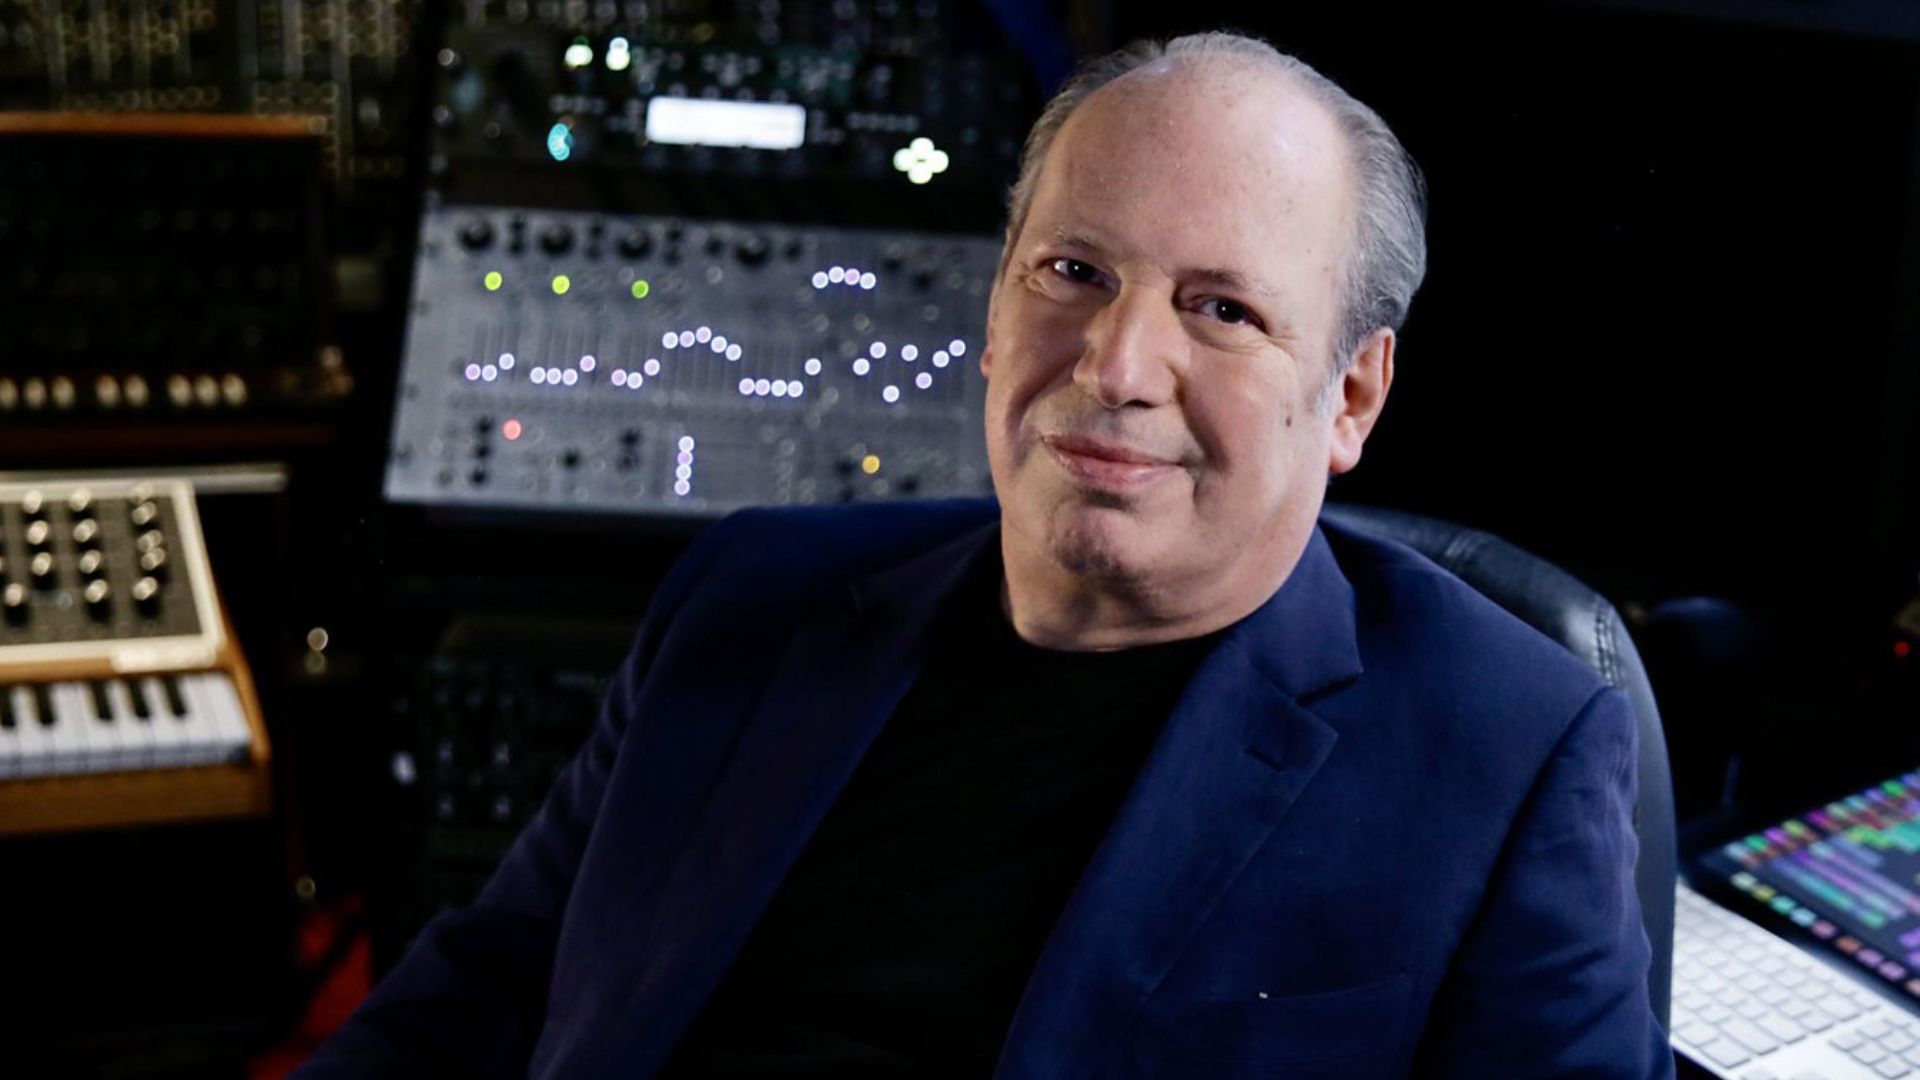 Hans Zimmer Partners with AJHSynth to Rebuild Legendary BBC Synth Setup